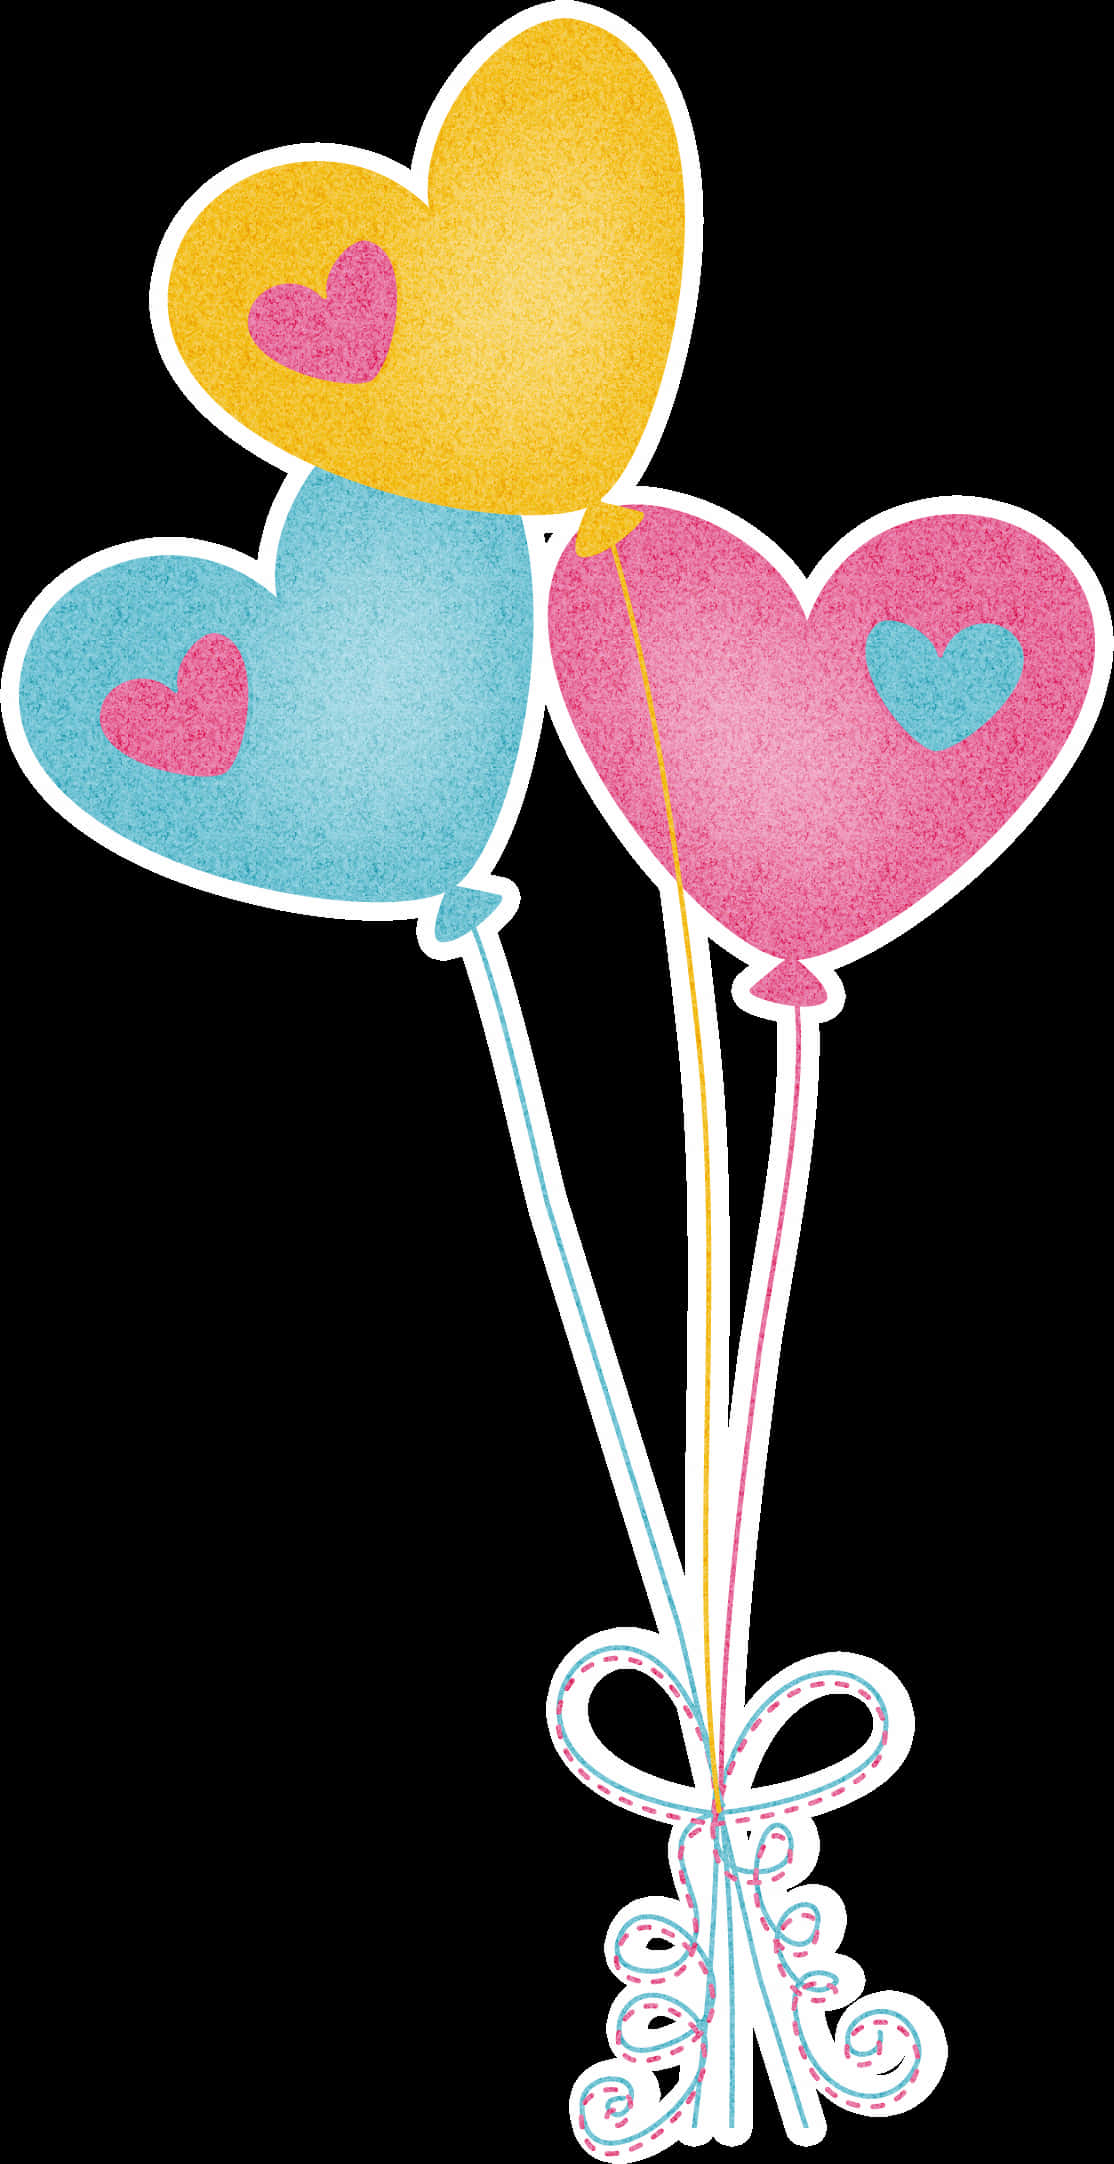 Heart Shaped Balloons Illustration PNG